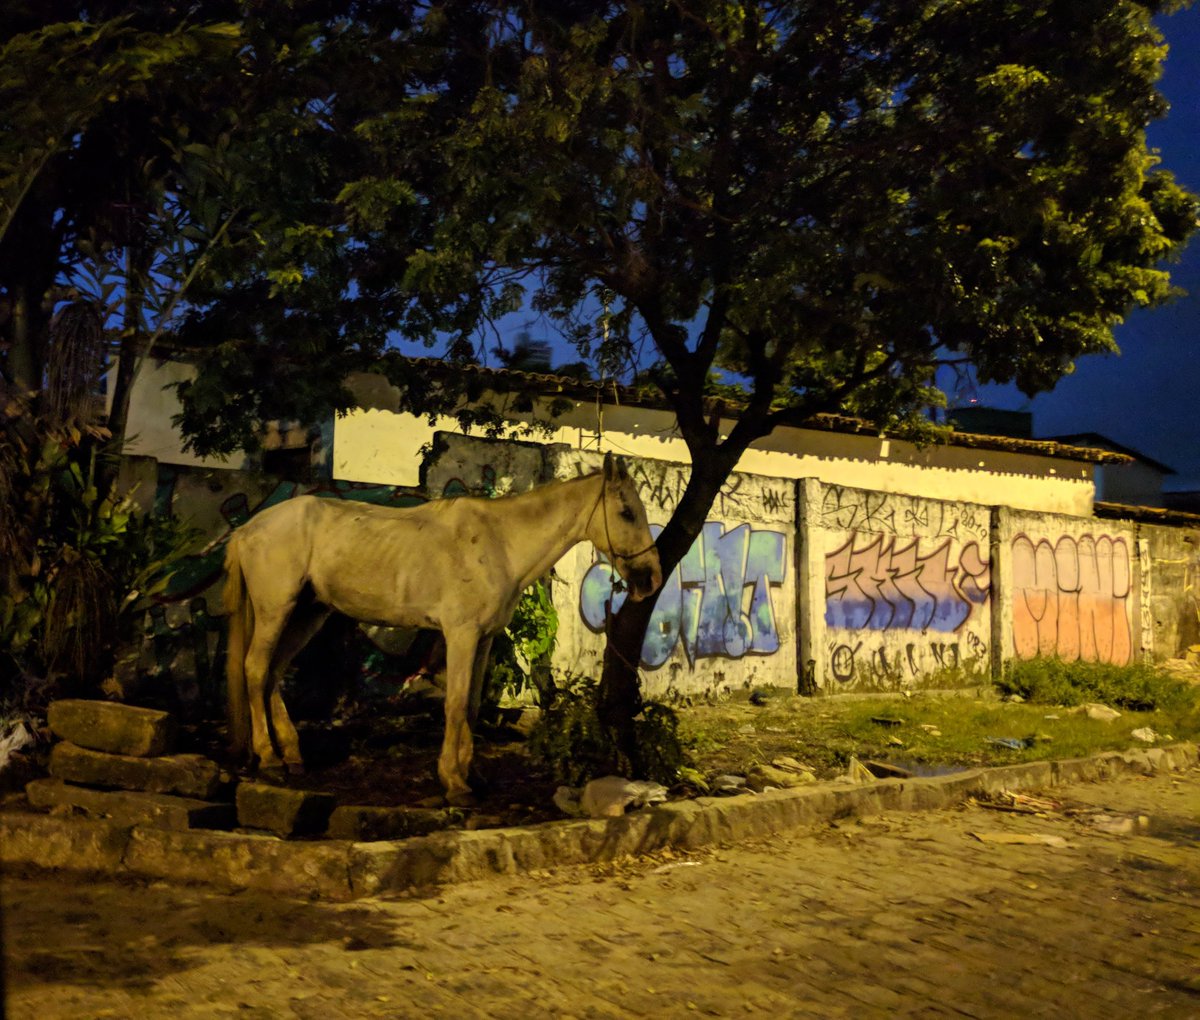 Back in the community, it's a peaceful night. A horse munches quietly as residents politely wait their turn on a narrow bridge over a filthy river. This place was violent, unsafe, and isolated; now it's bustling, orderly. Why did it take a prison gang to bring about change? END